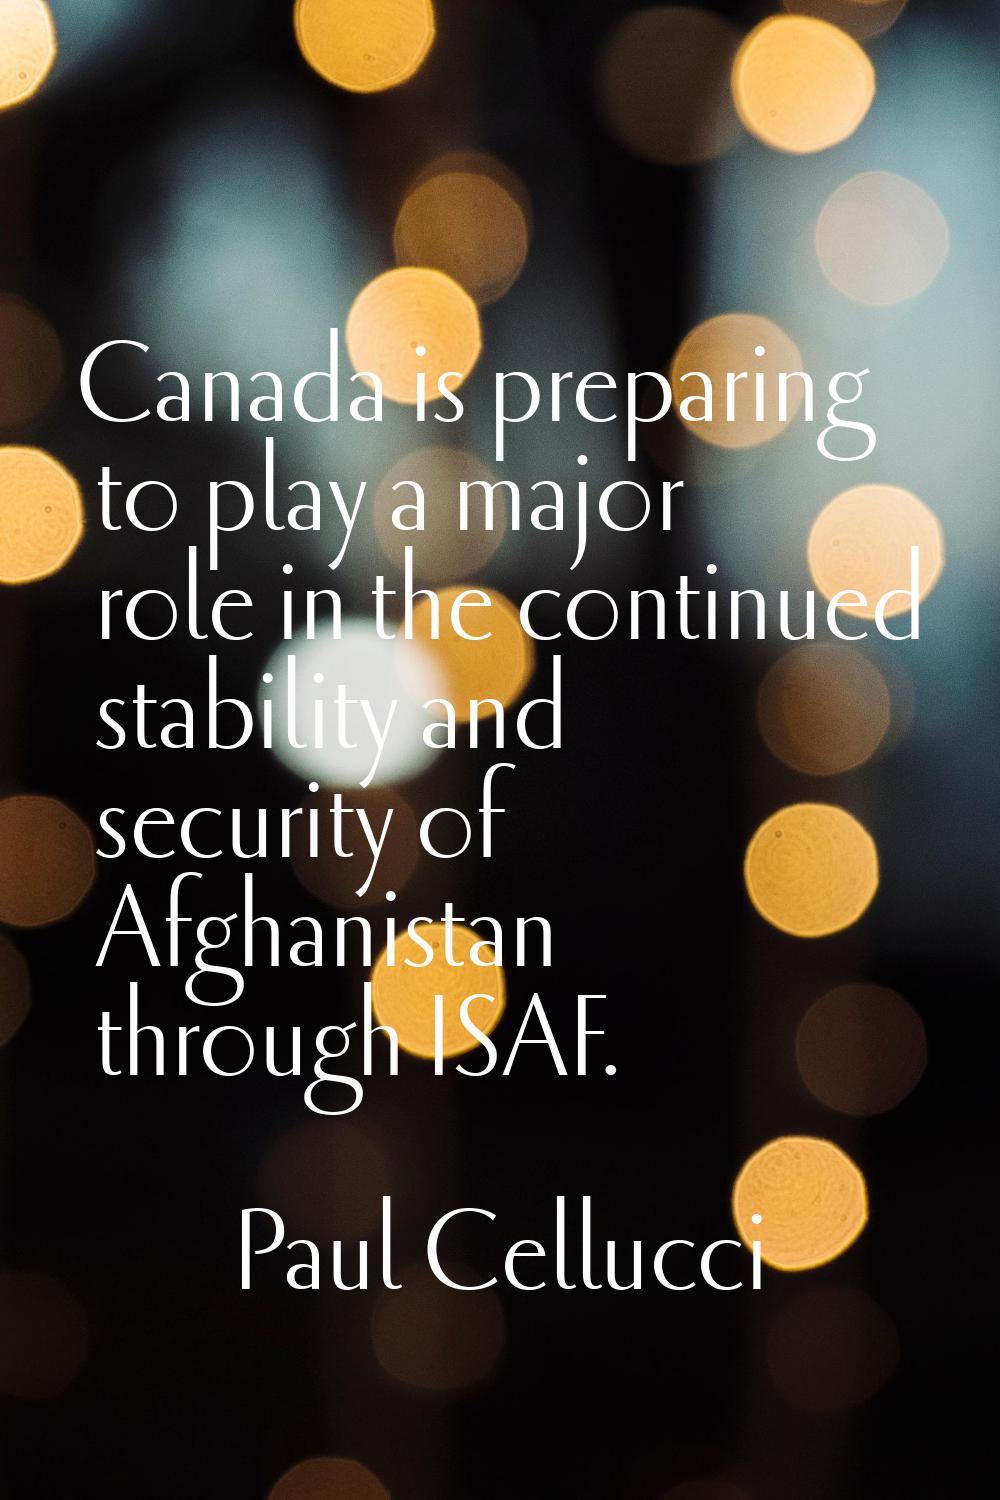 Canada is preparing to play a major role in the continued stability and security of Afghanistan thr